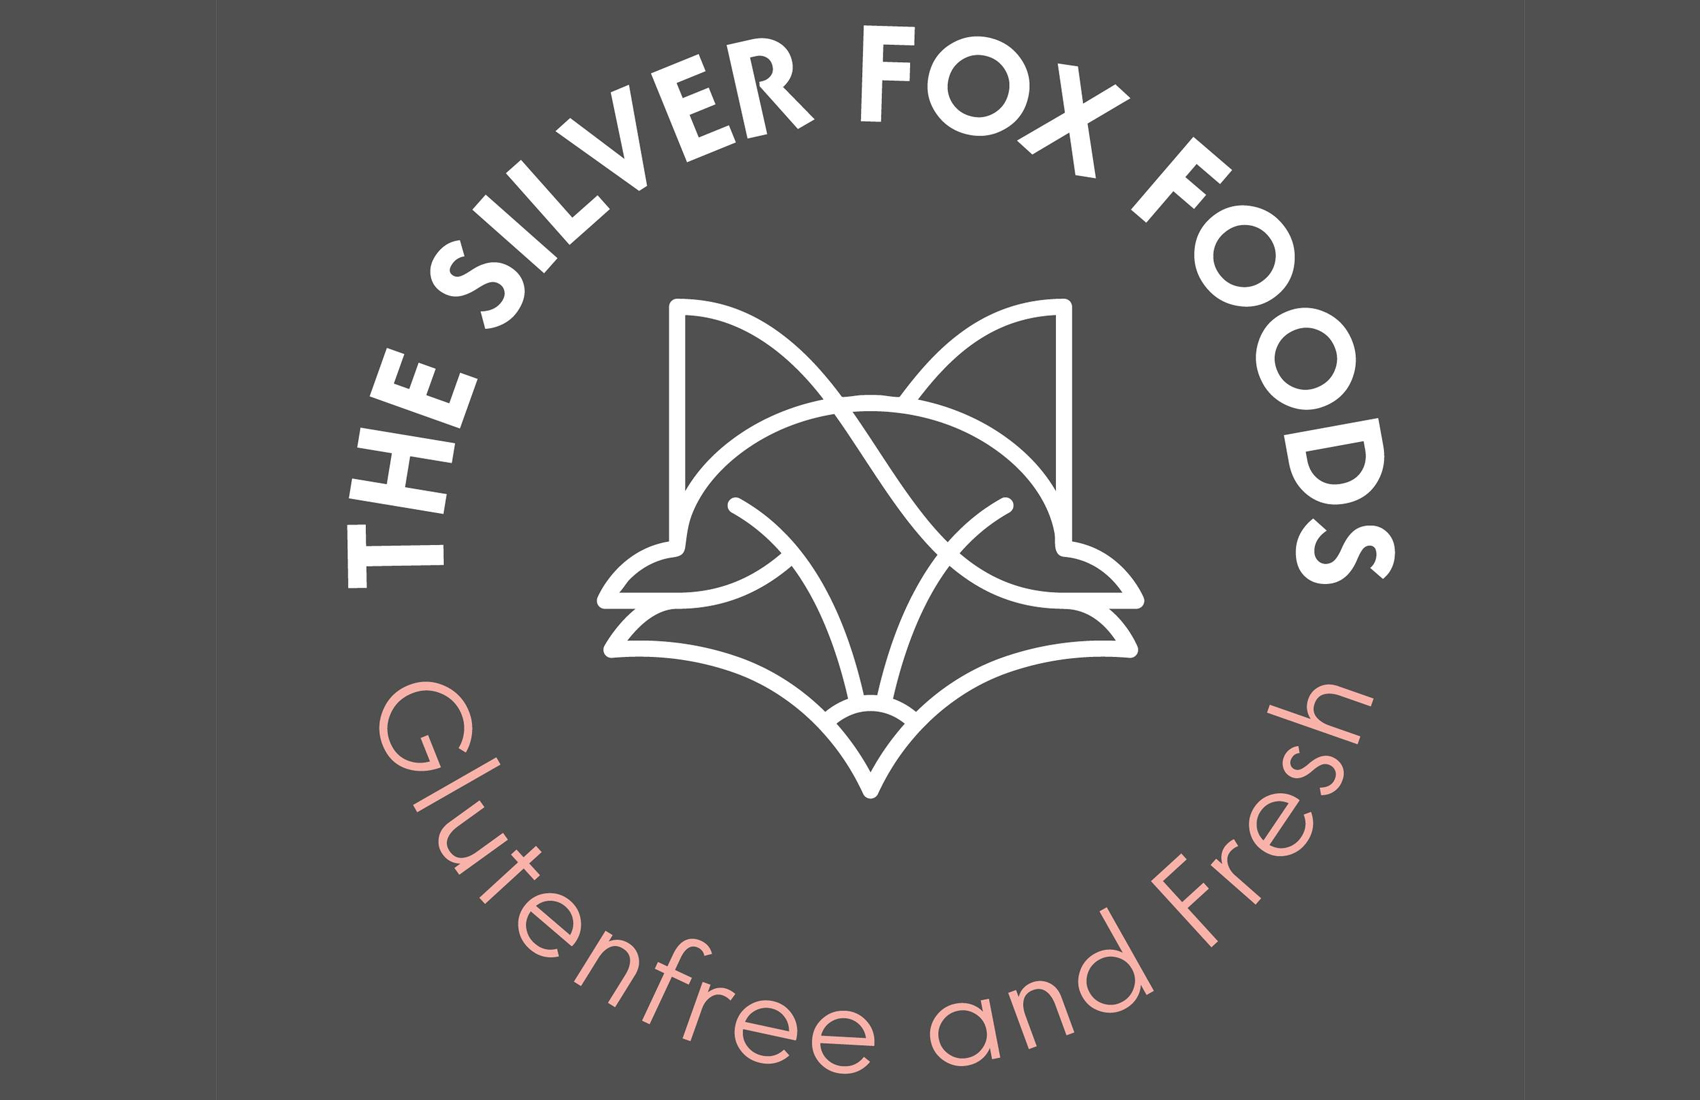 The Silver Fox Foods